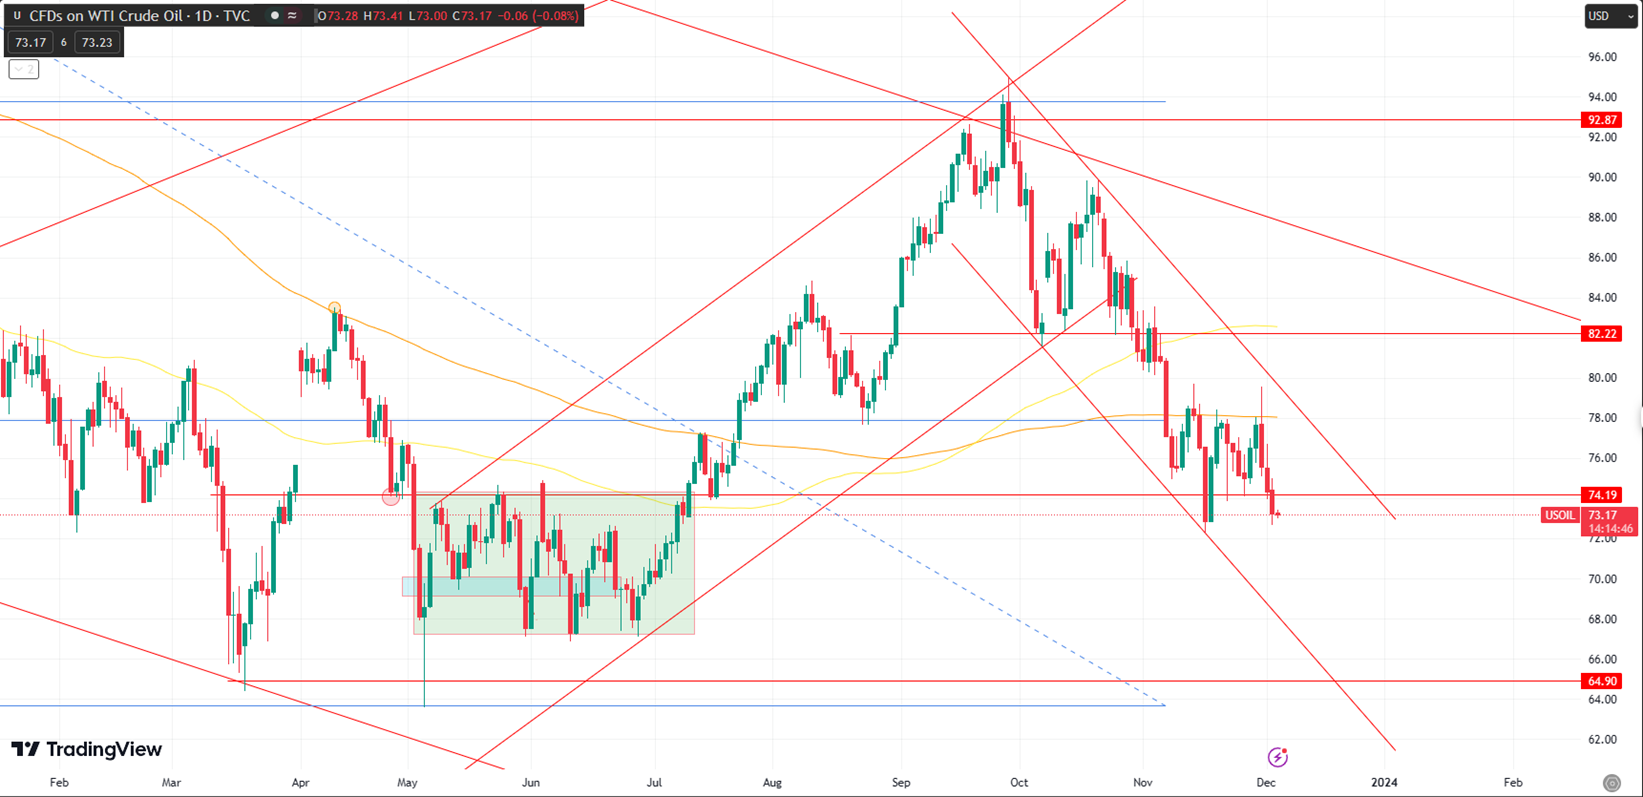 WTI Remains Bullish as Price Approaches $72 Support Following OPEC and US Strategic Stock Dynamics